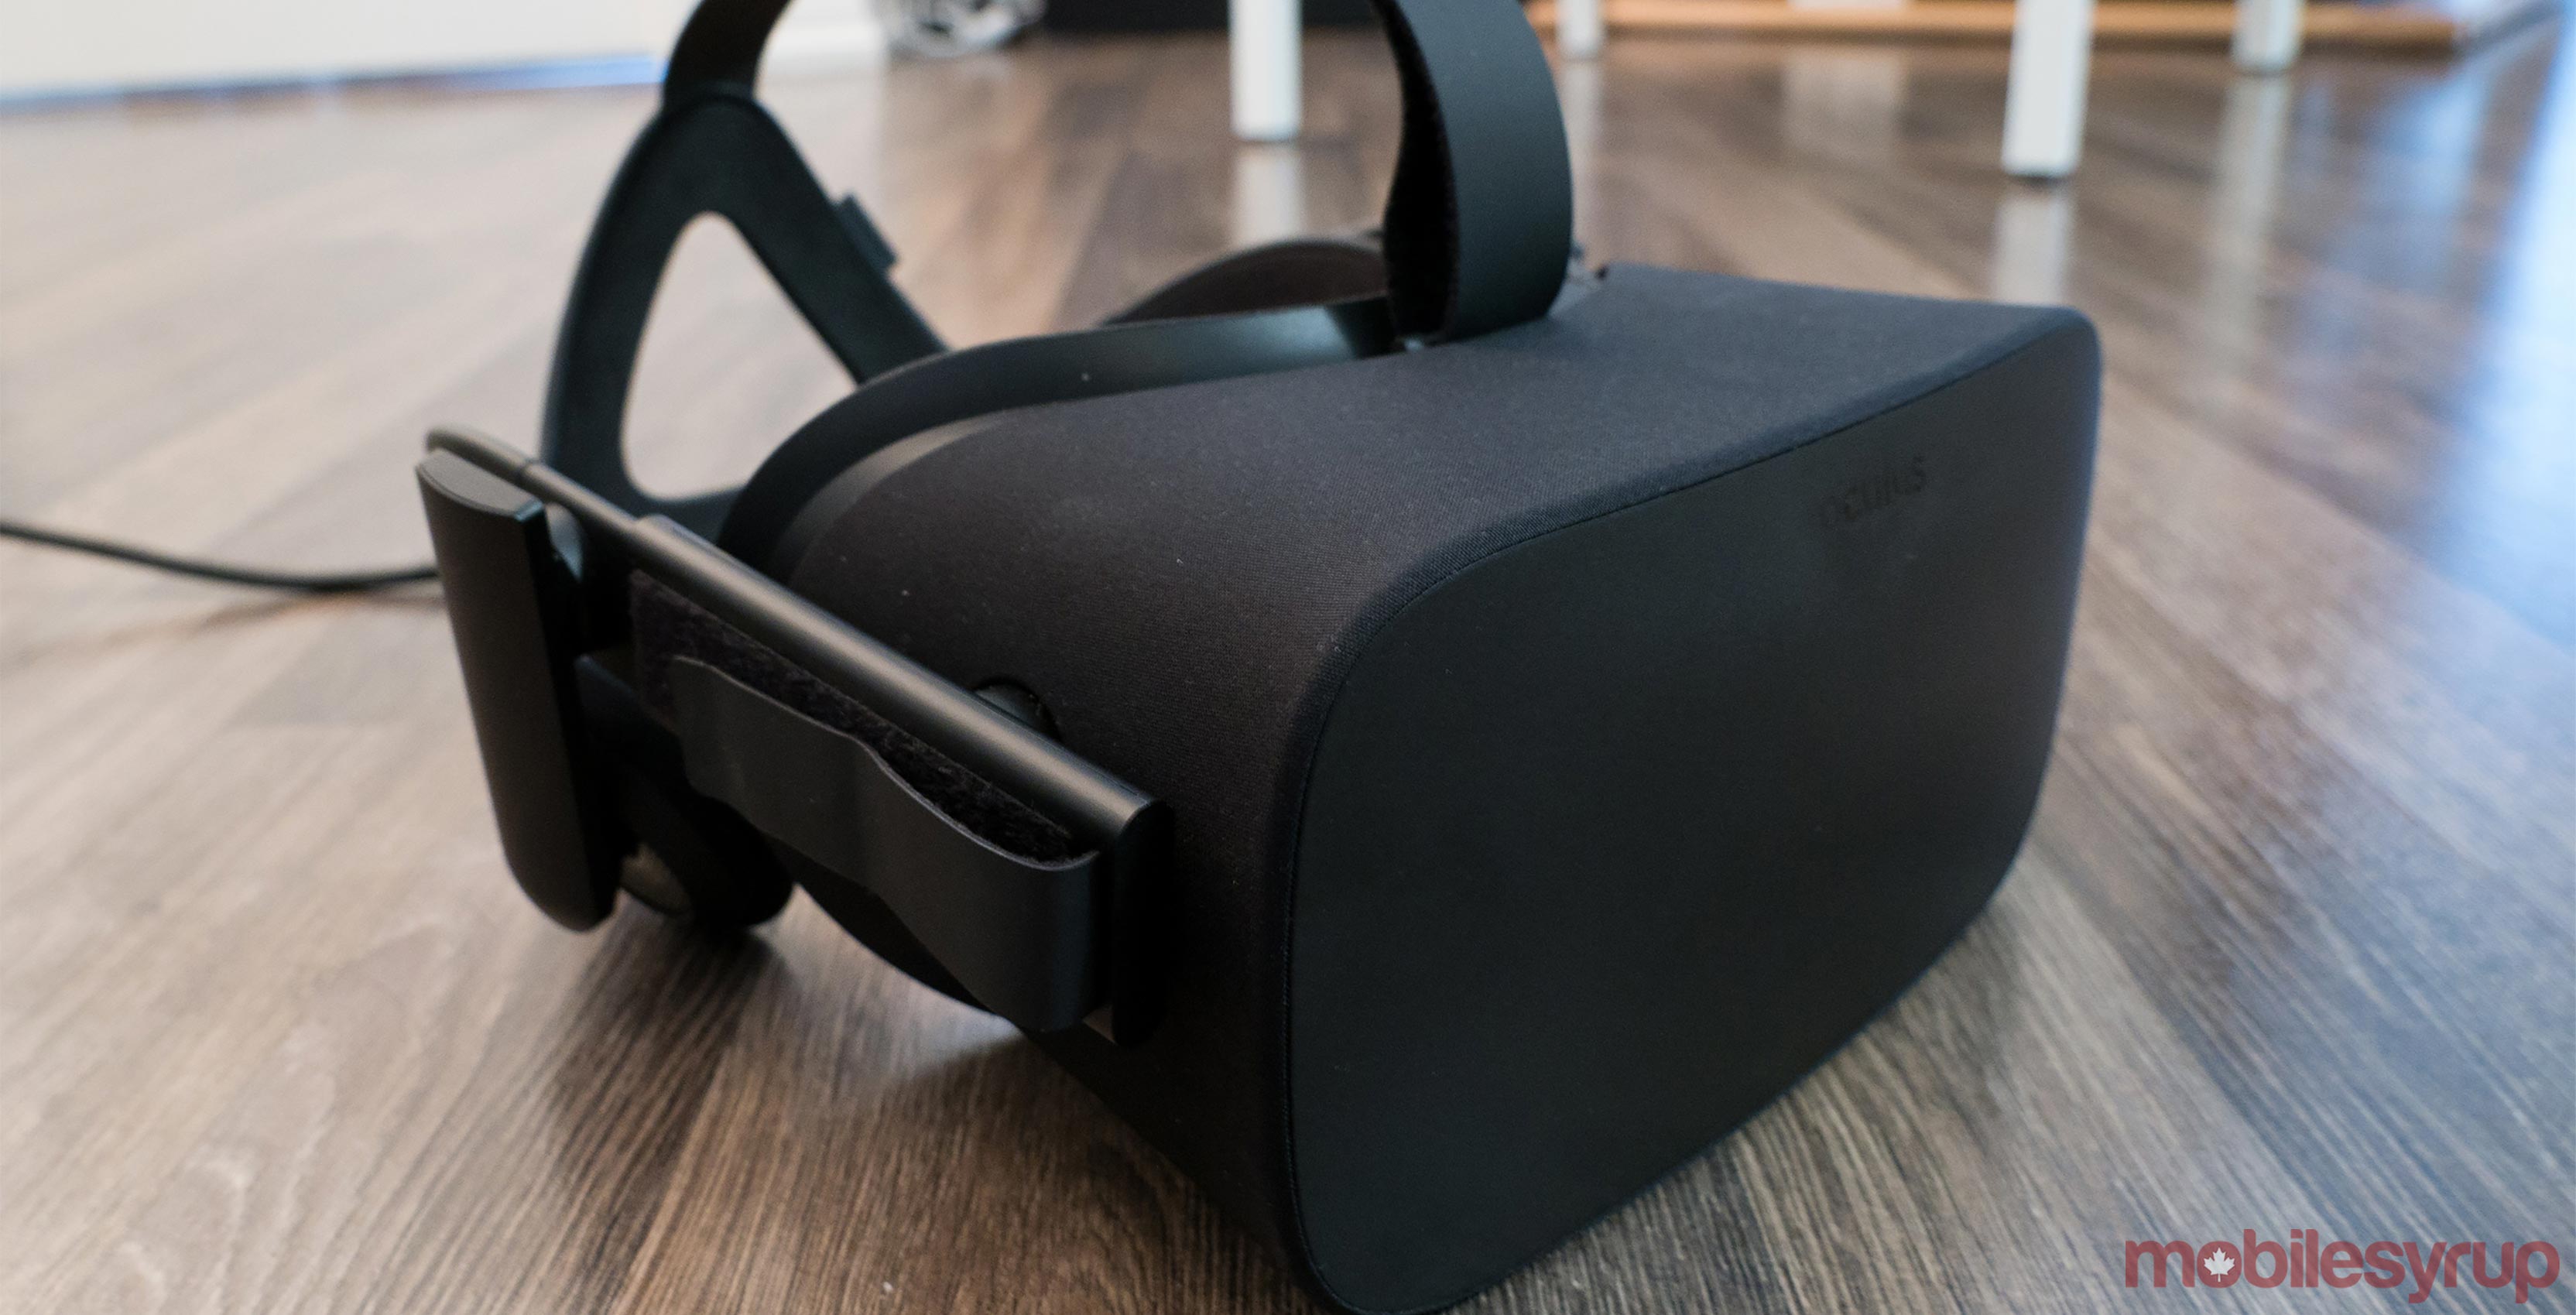 how much is a oculus rift cost